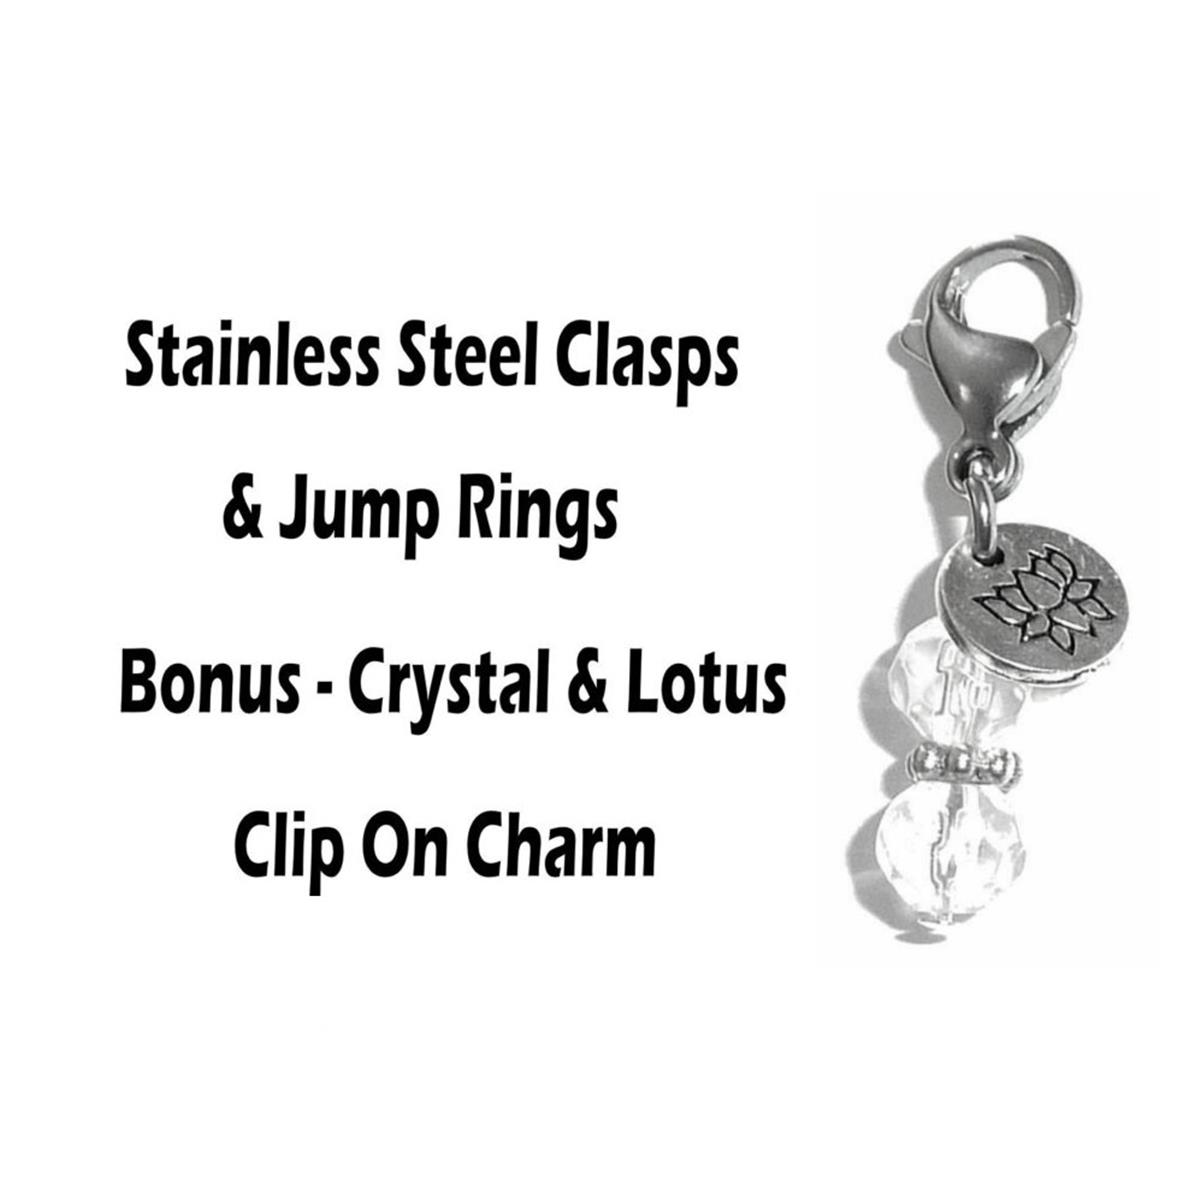 4 Pack Love Mix Clip On Charms - Whimsical Charms Clip On Anywhere